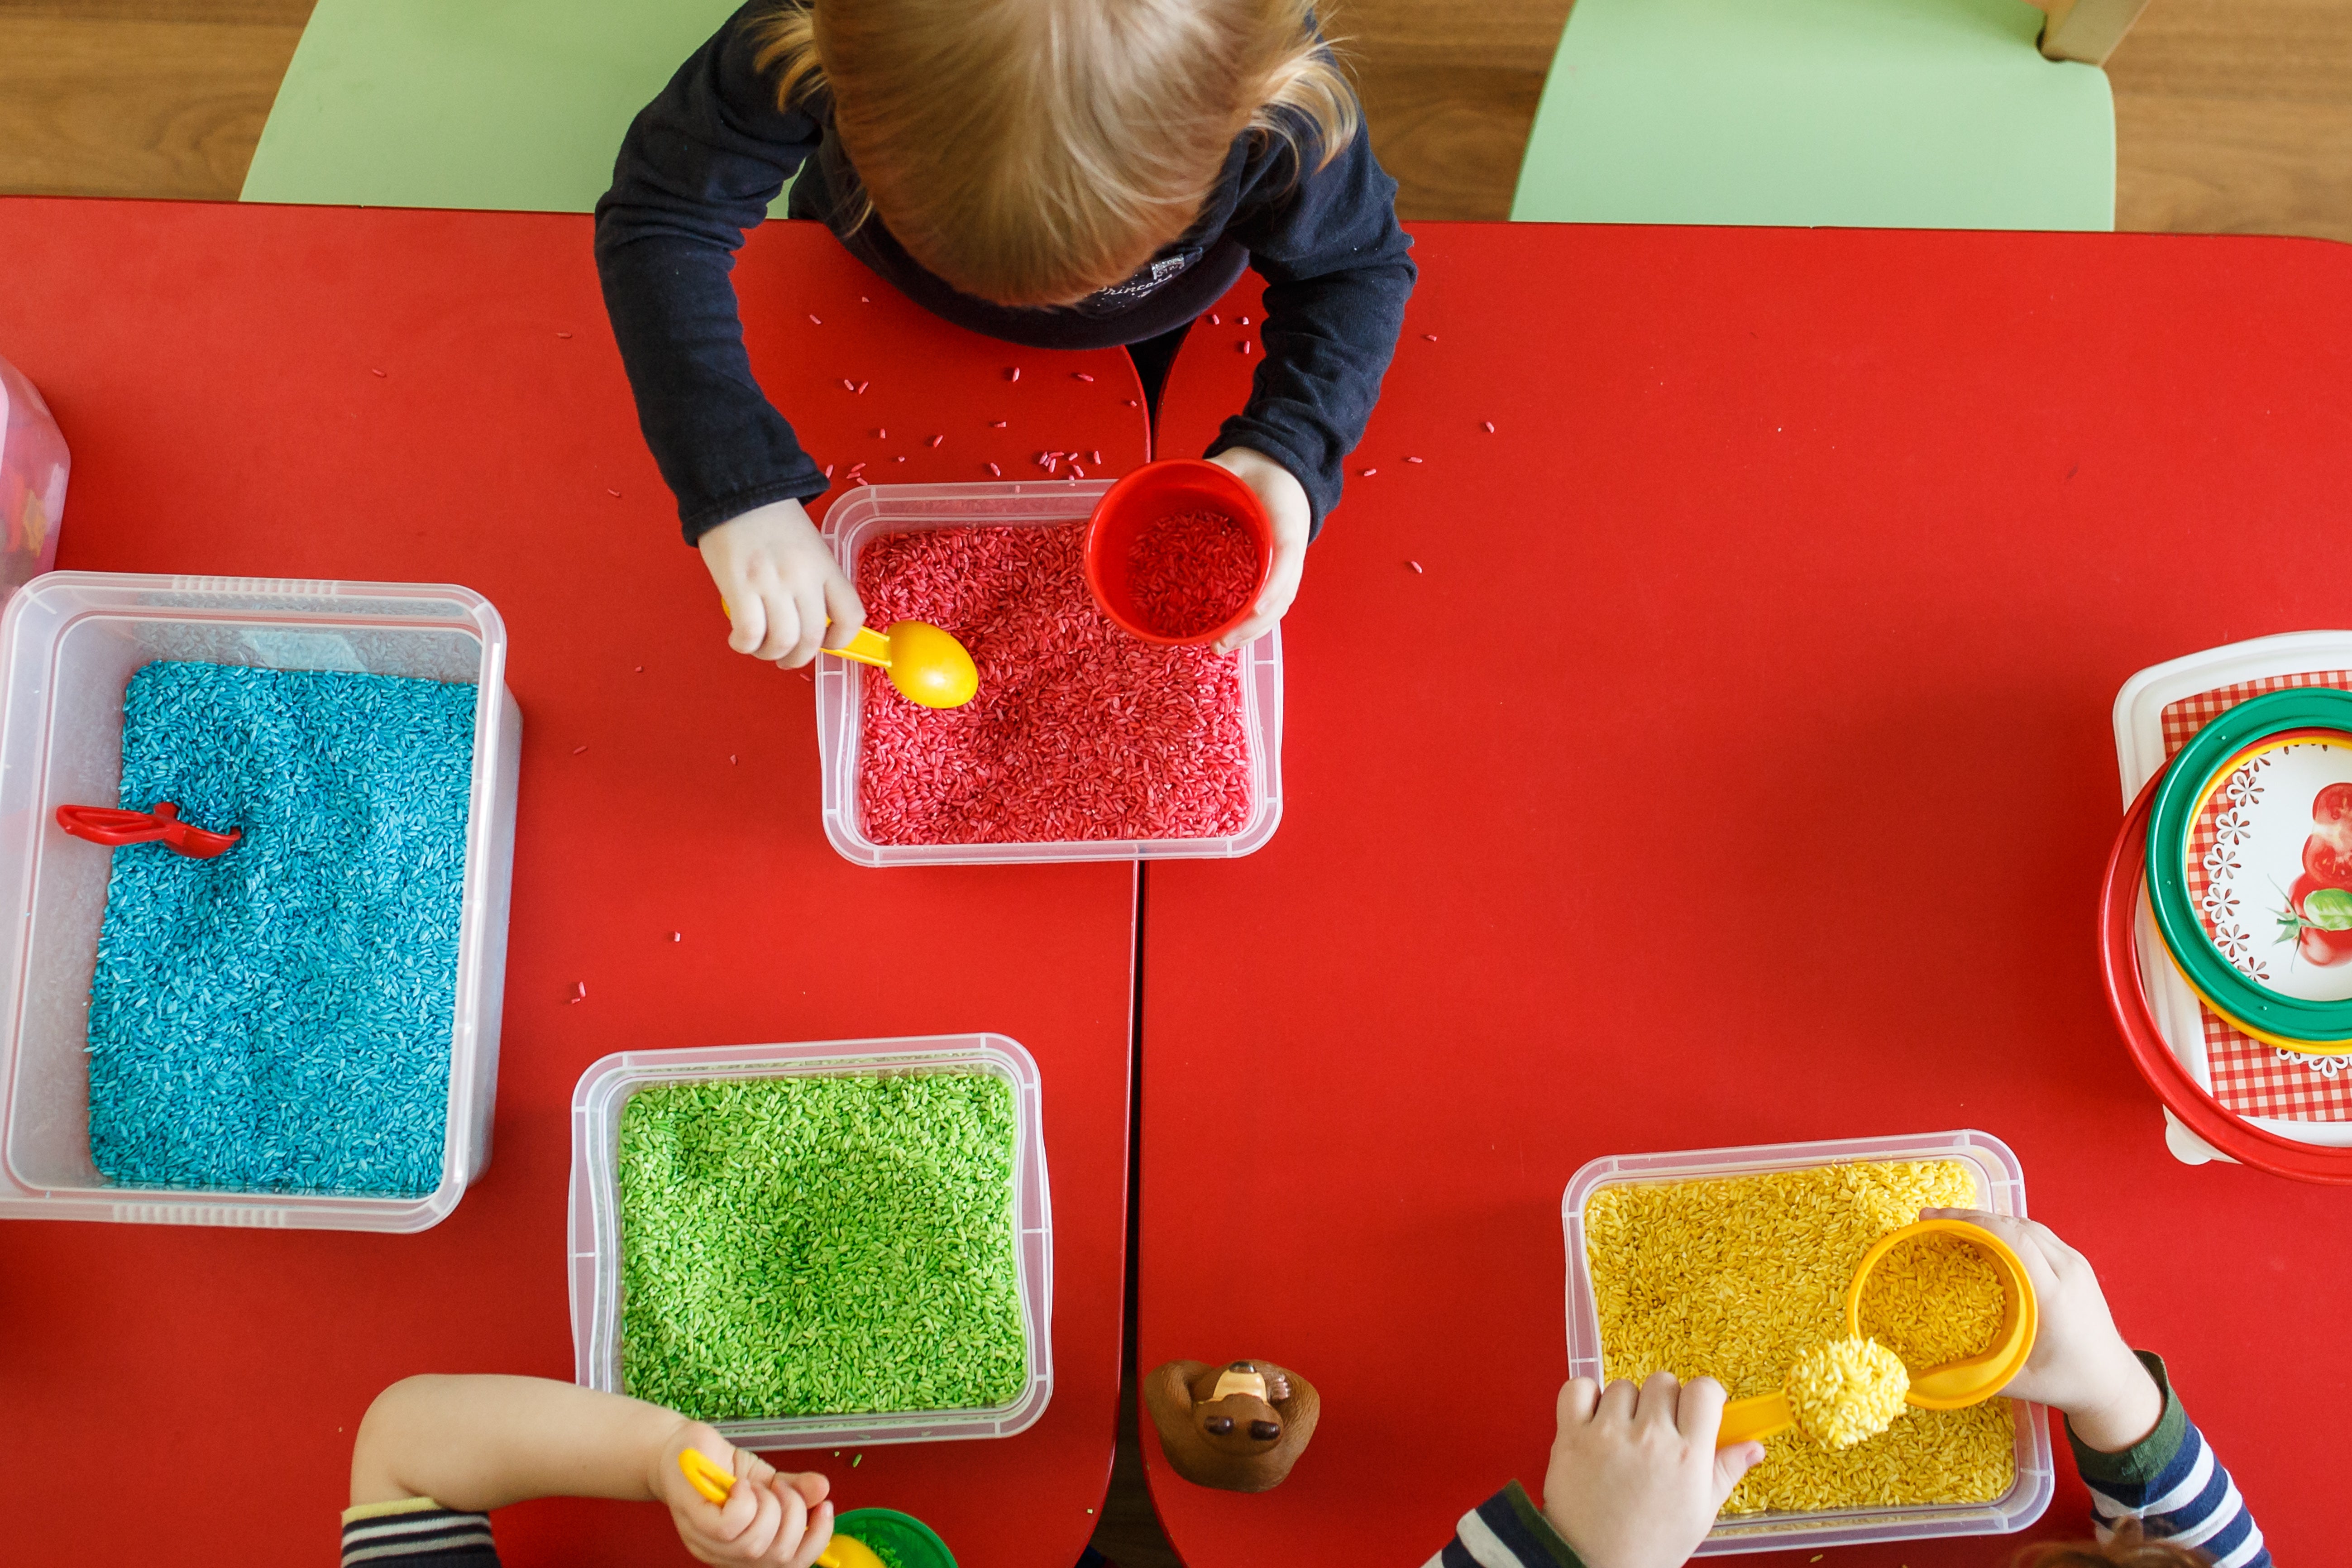 How to Clean Up Messy Play - Left Brain Craft Brain